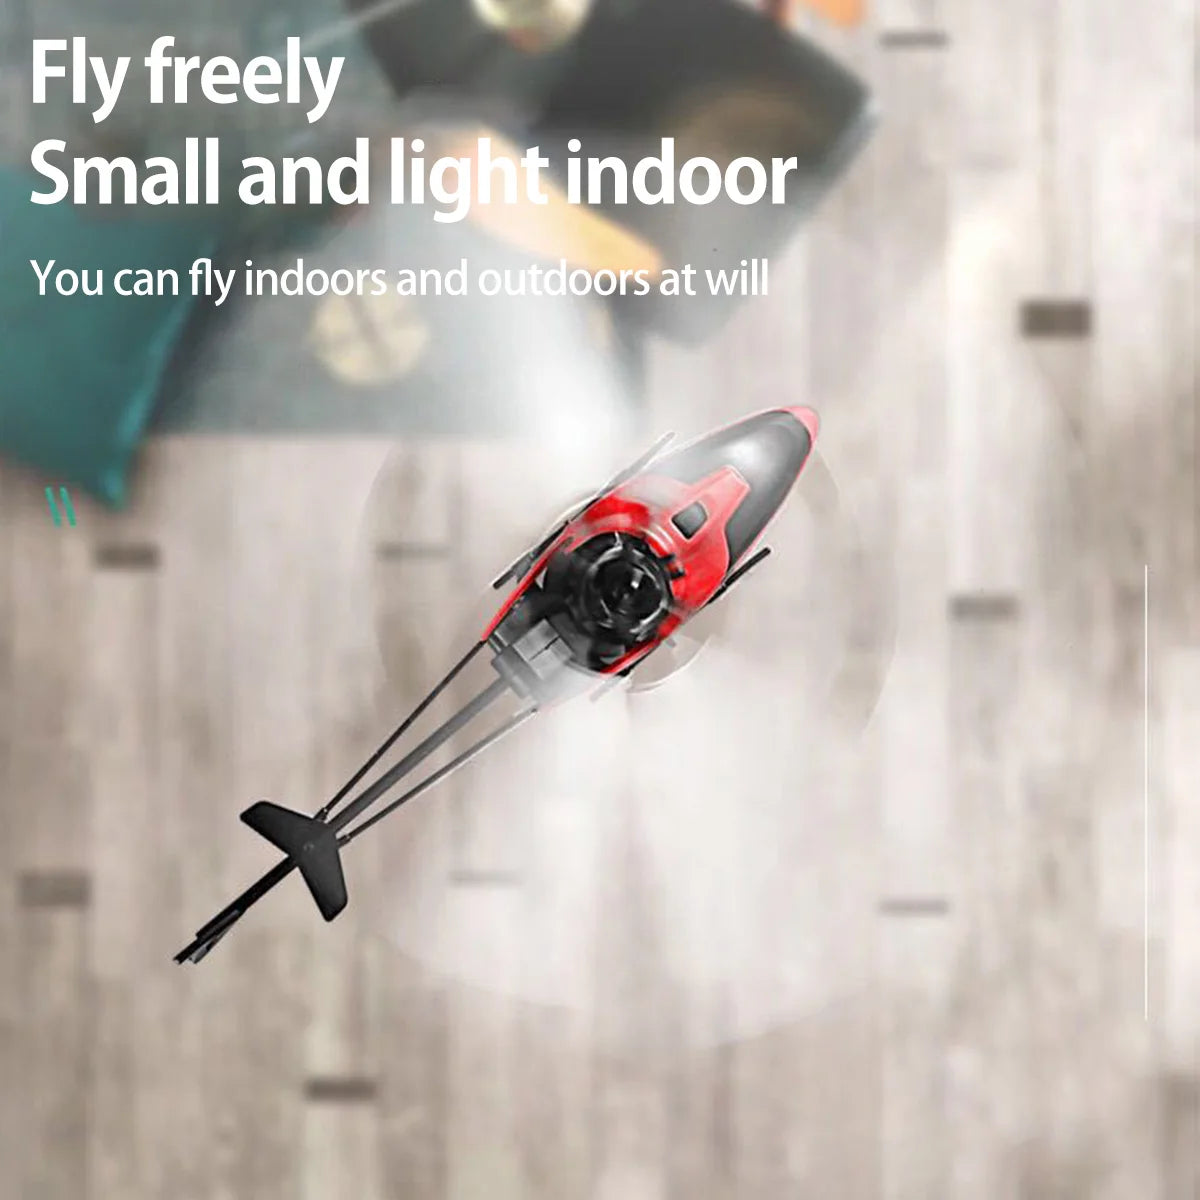 CY-38 Rc Helicopter, Fly freely Small and light indoors and outdoorsat will .